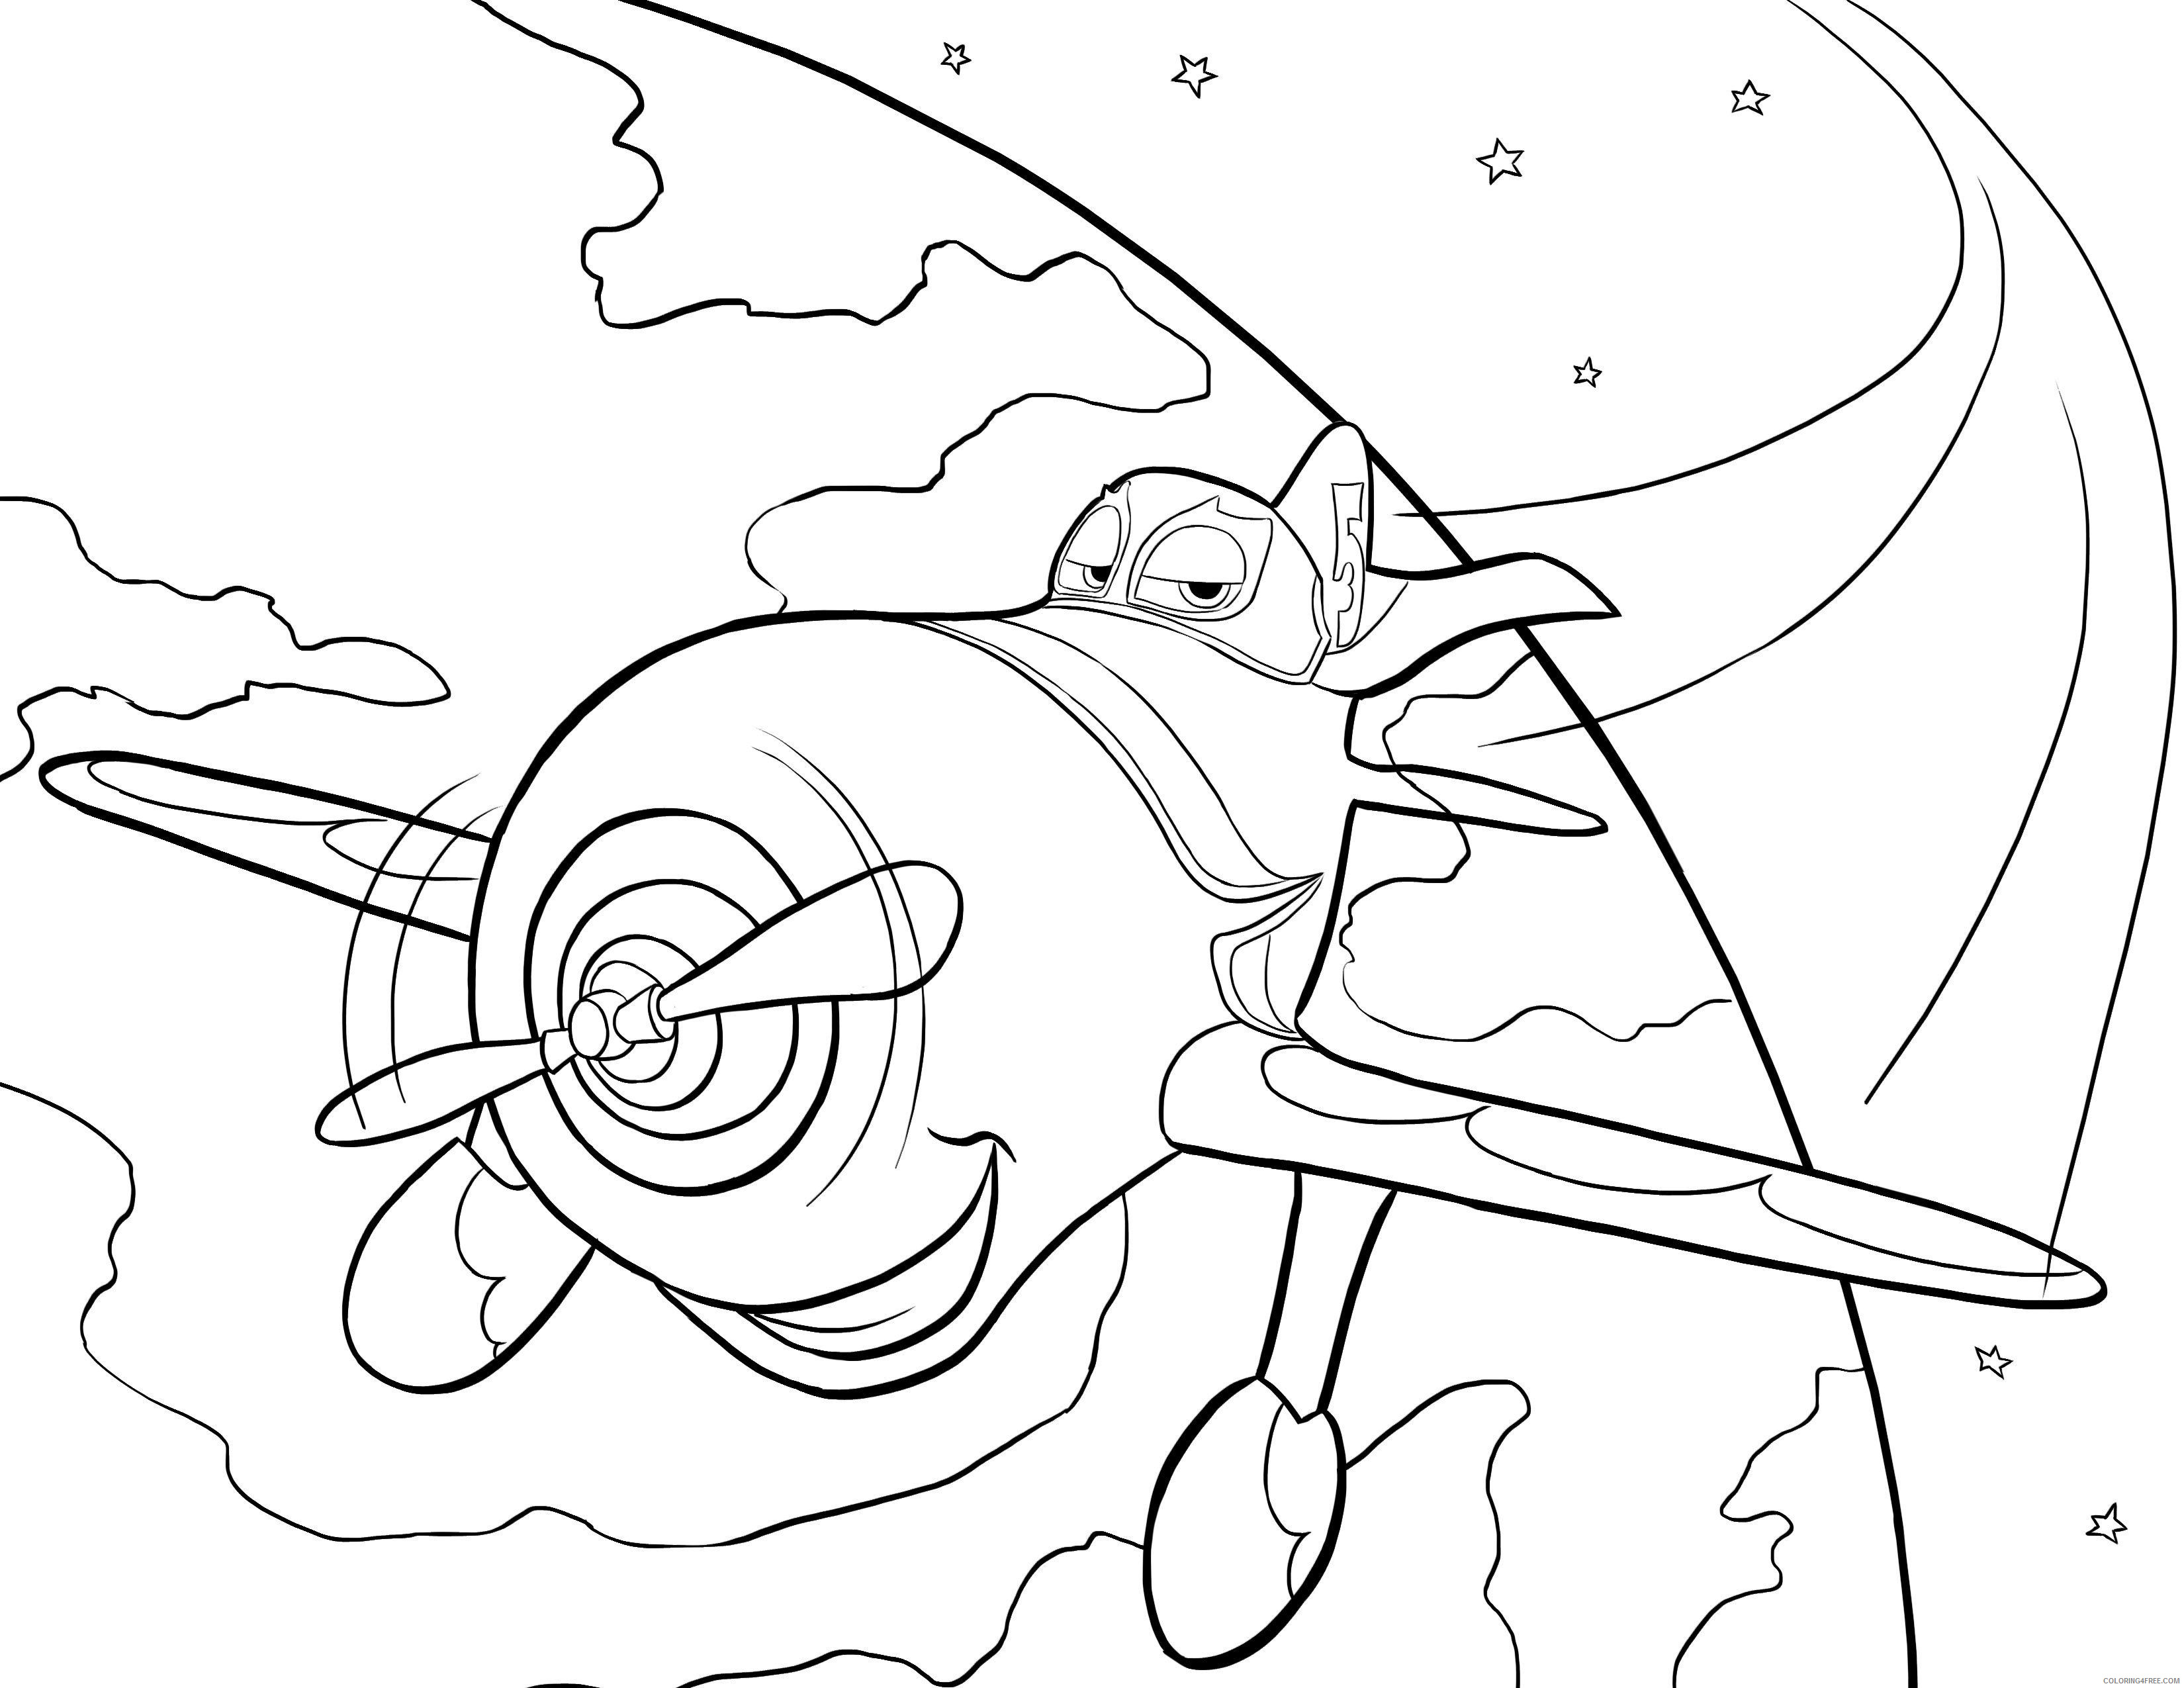 Disney Planes Coloring Pages Cartoons Planes Printable 2020 2347 Coloring4free